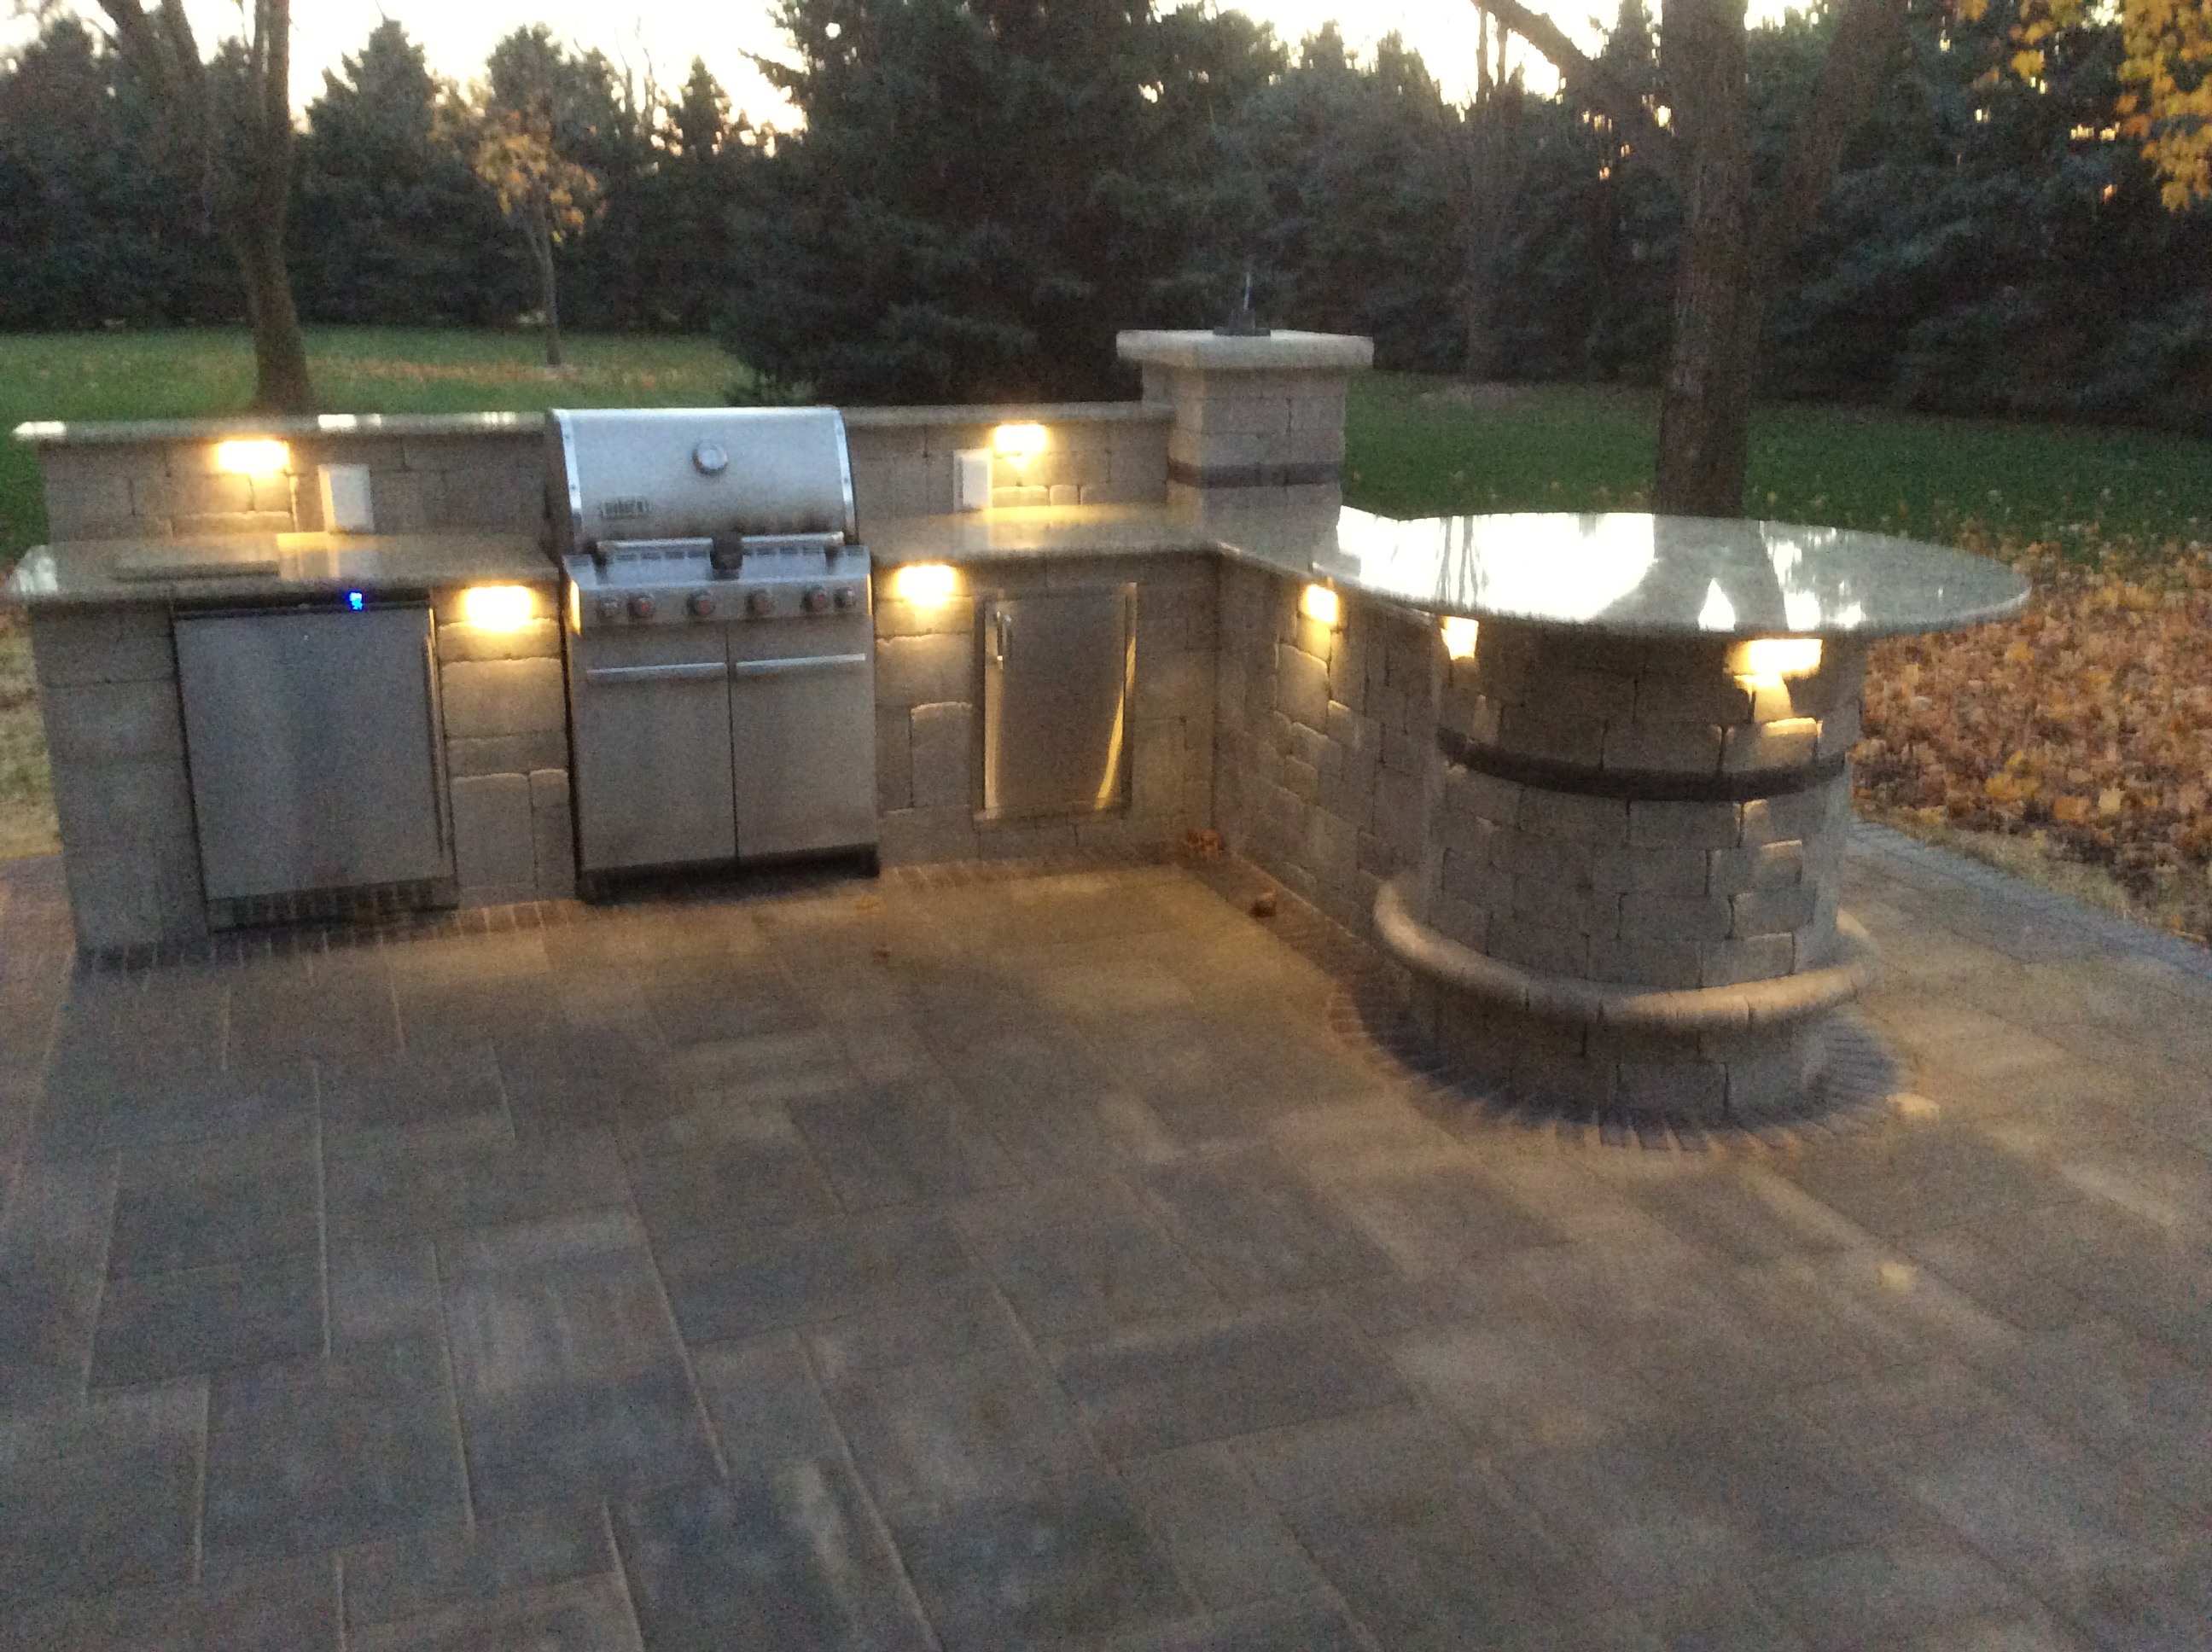 outdoor lighting along outdoor kitchen and bar area